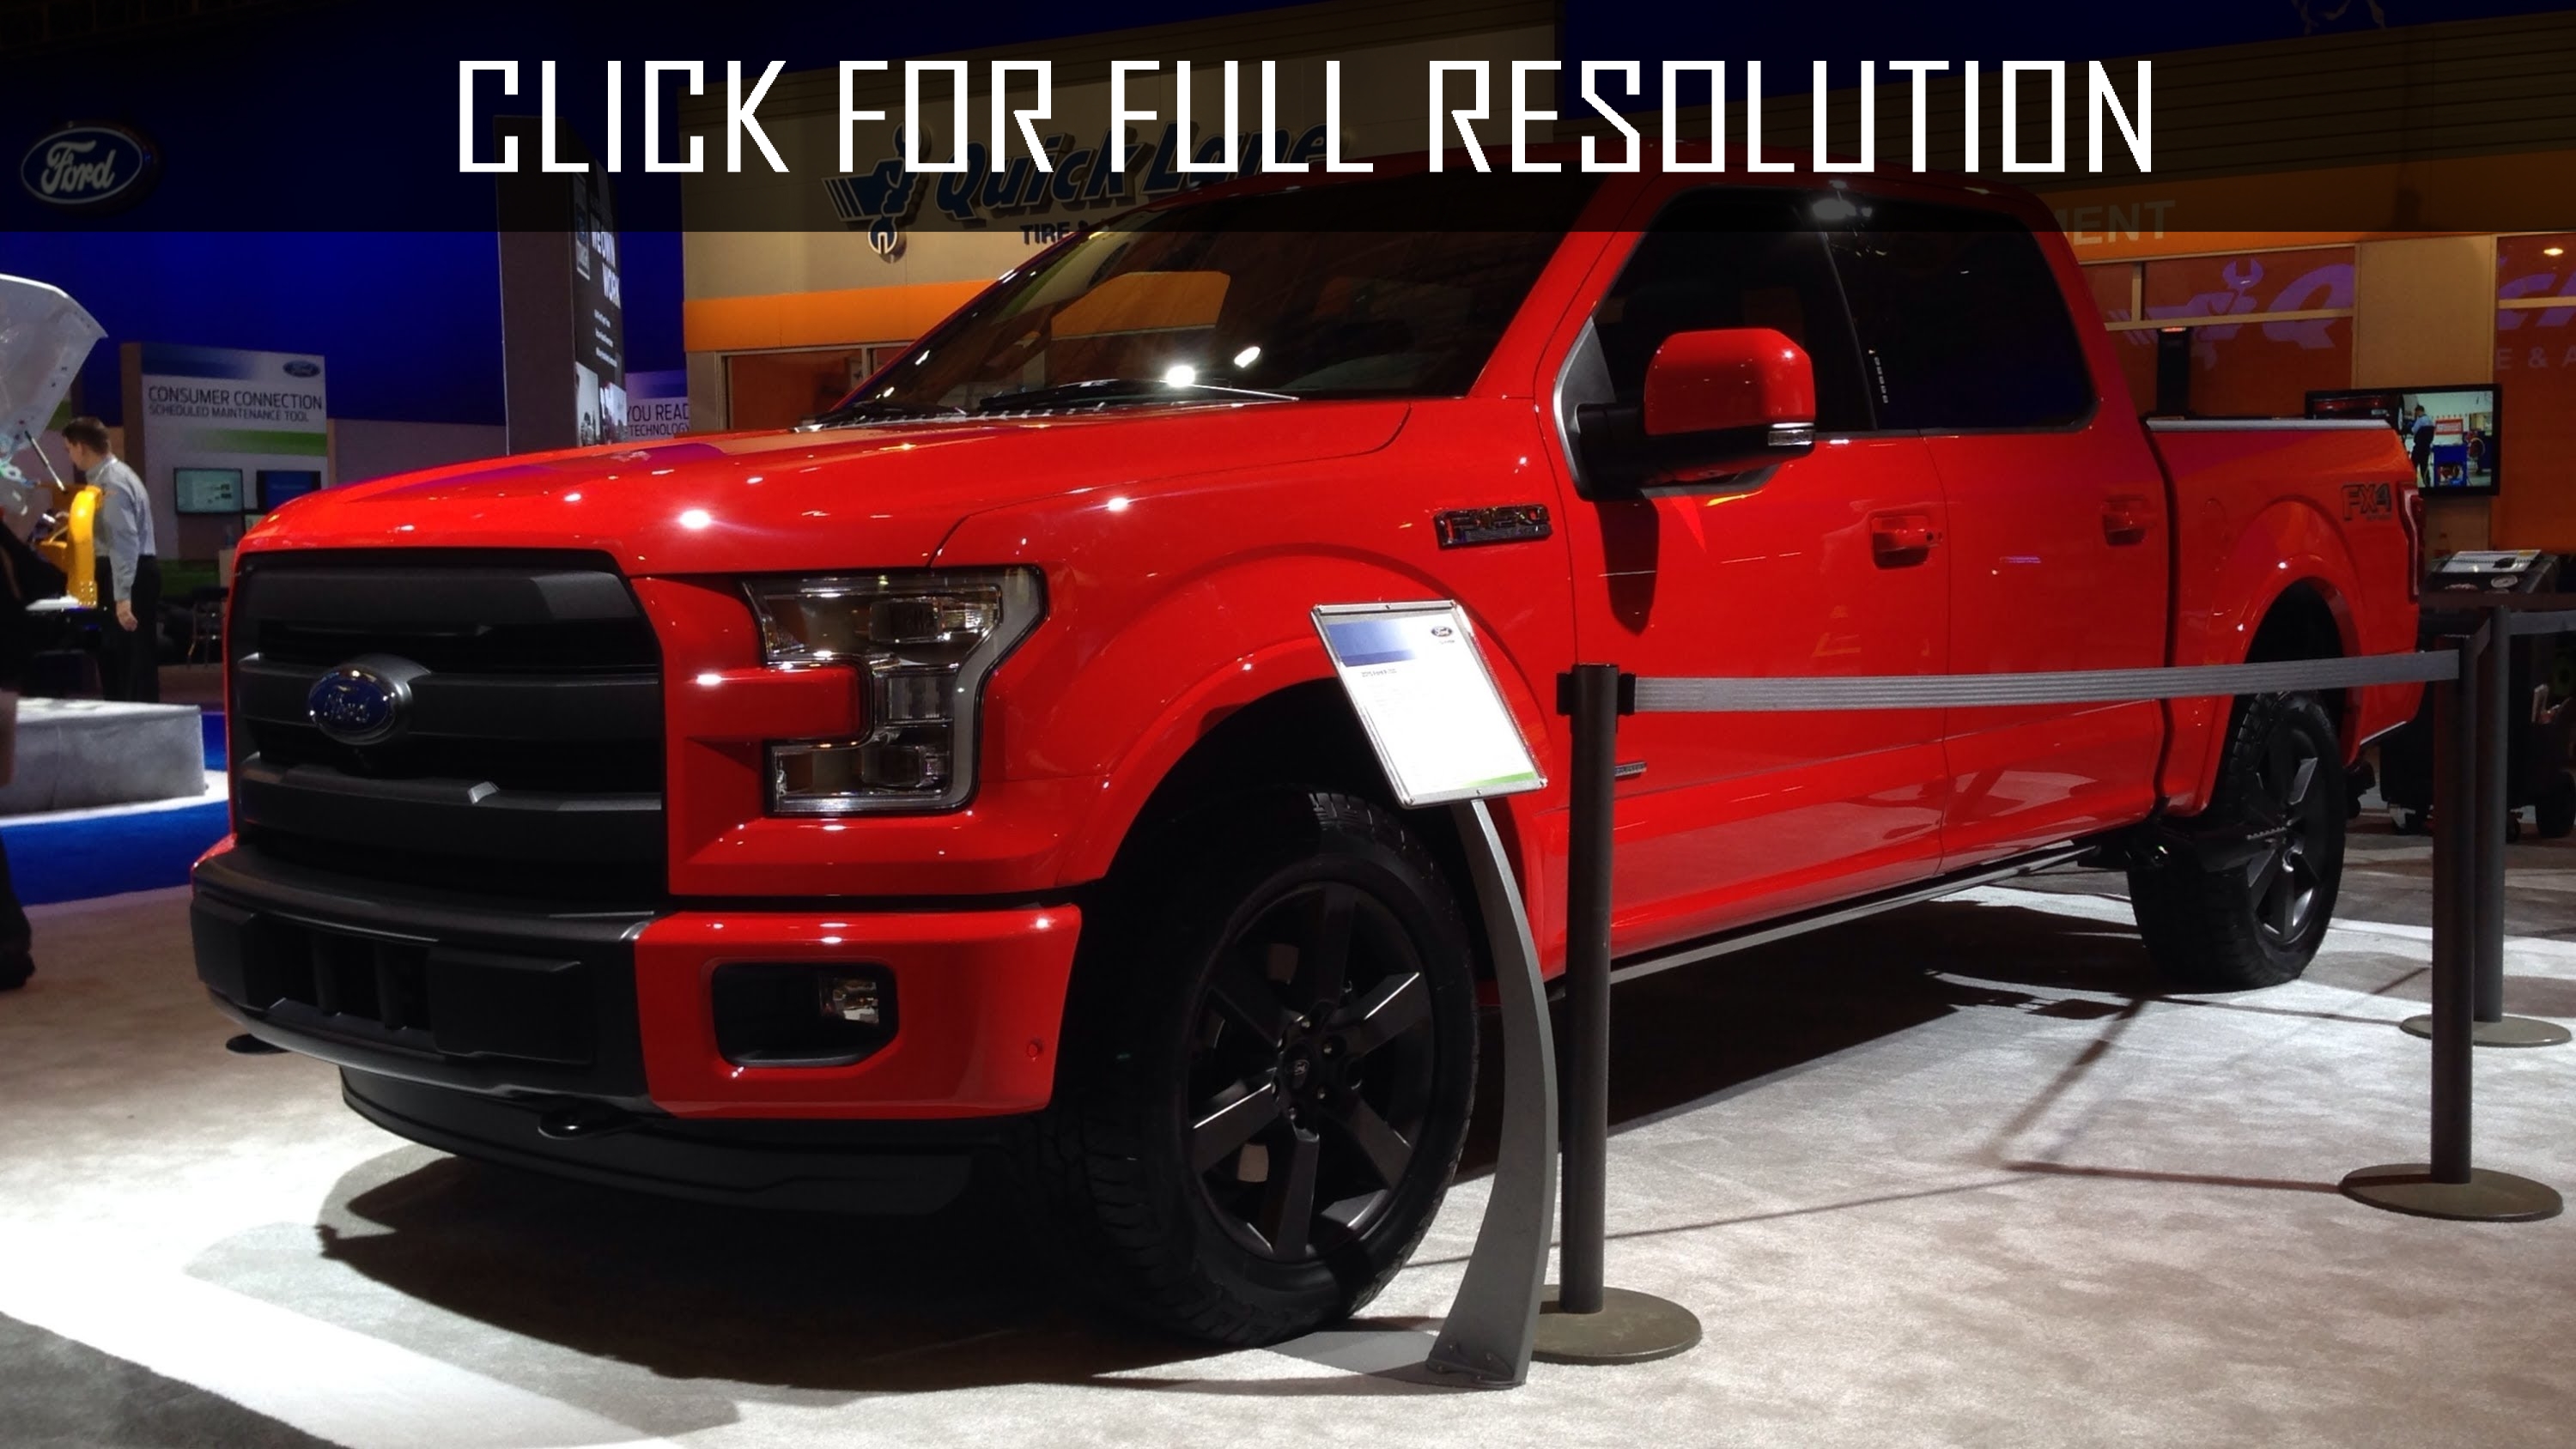 Ford F150 Fx4 2015